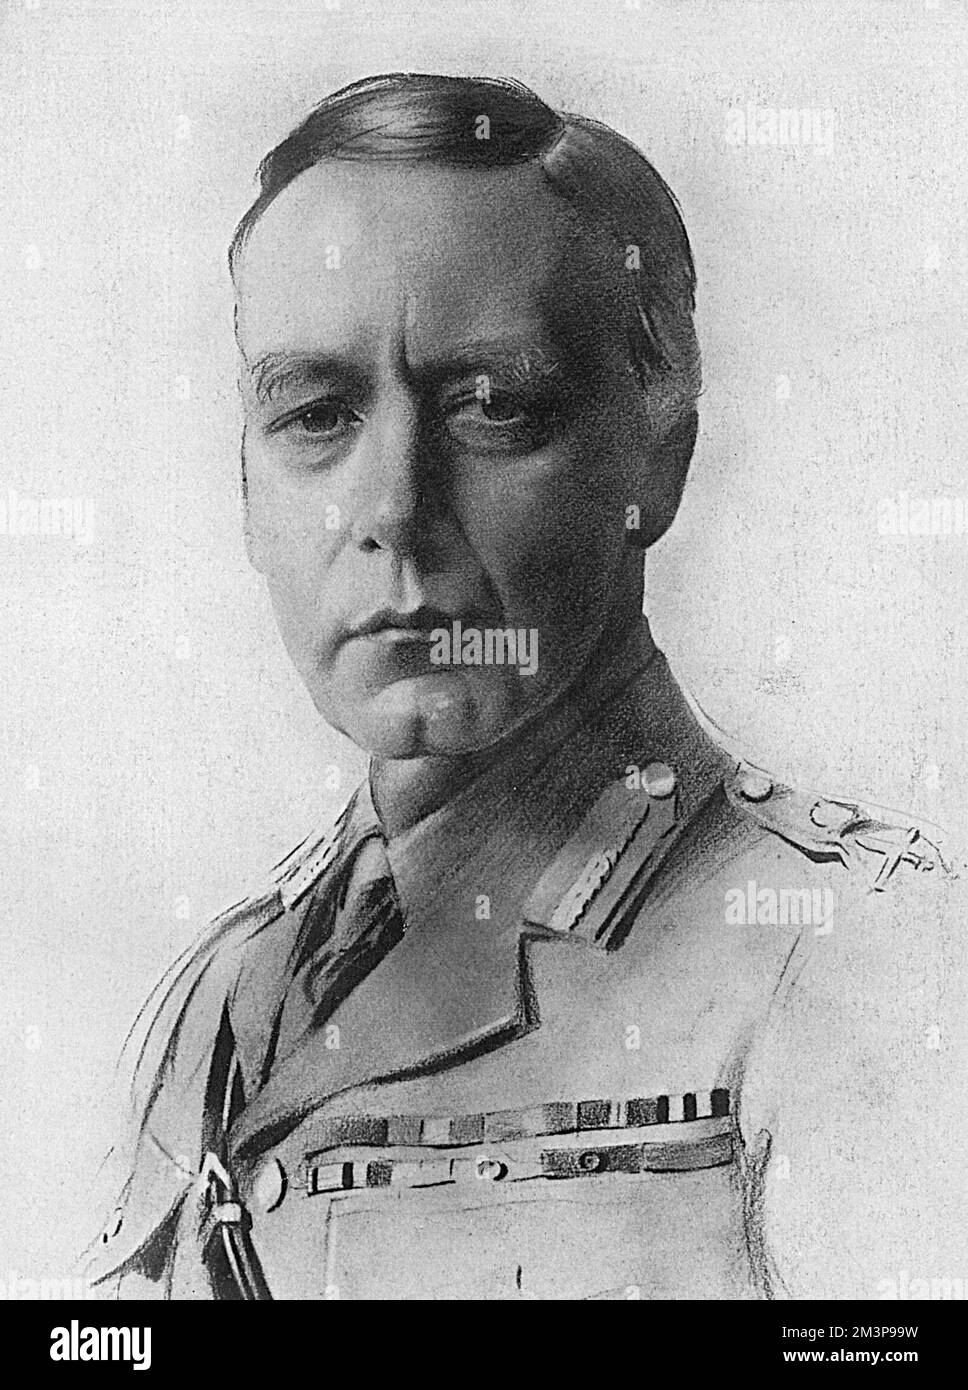 General SIR CECIL FREDERICK NEVIL MACREADY (1862 - 1946) British Army officer serving in senior staff appointments in the First World War. Also served for two years as Commissioner of the London Metropolitan Police.  Pictured when he was Adjutant-General.  Macready was responsible for the establishment of the Registration of War Graves Department which ensured every known grave of every soldier in every theatre of war was registered and photographed.     Date: 1917 Stock Photo